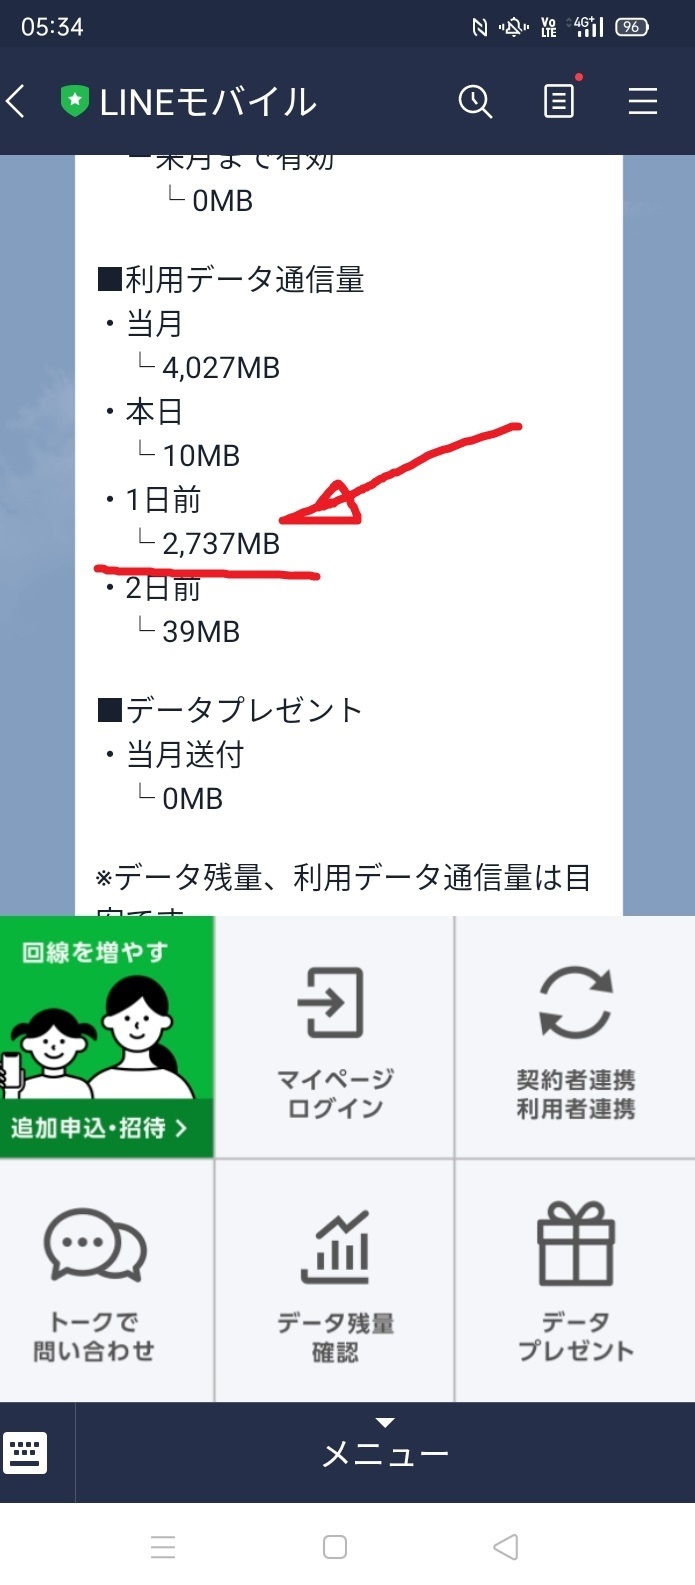 sumaho_oppo_android10_update_.jpg